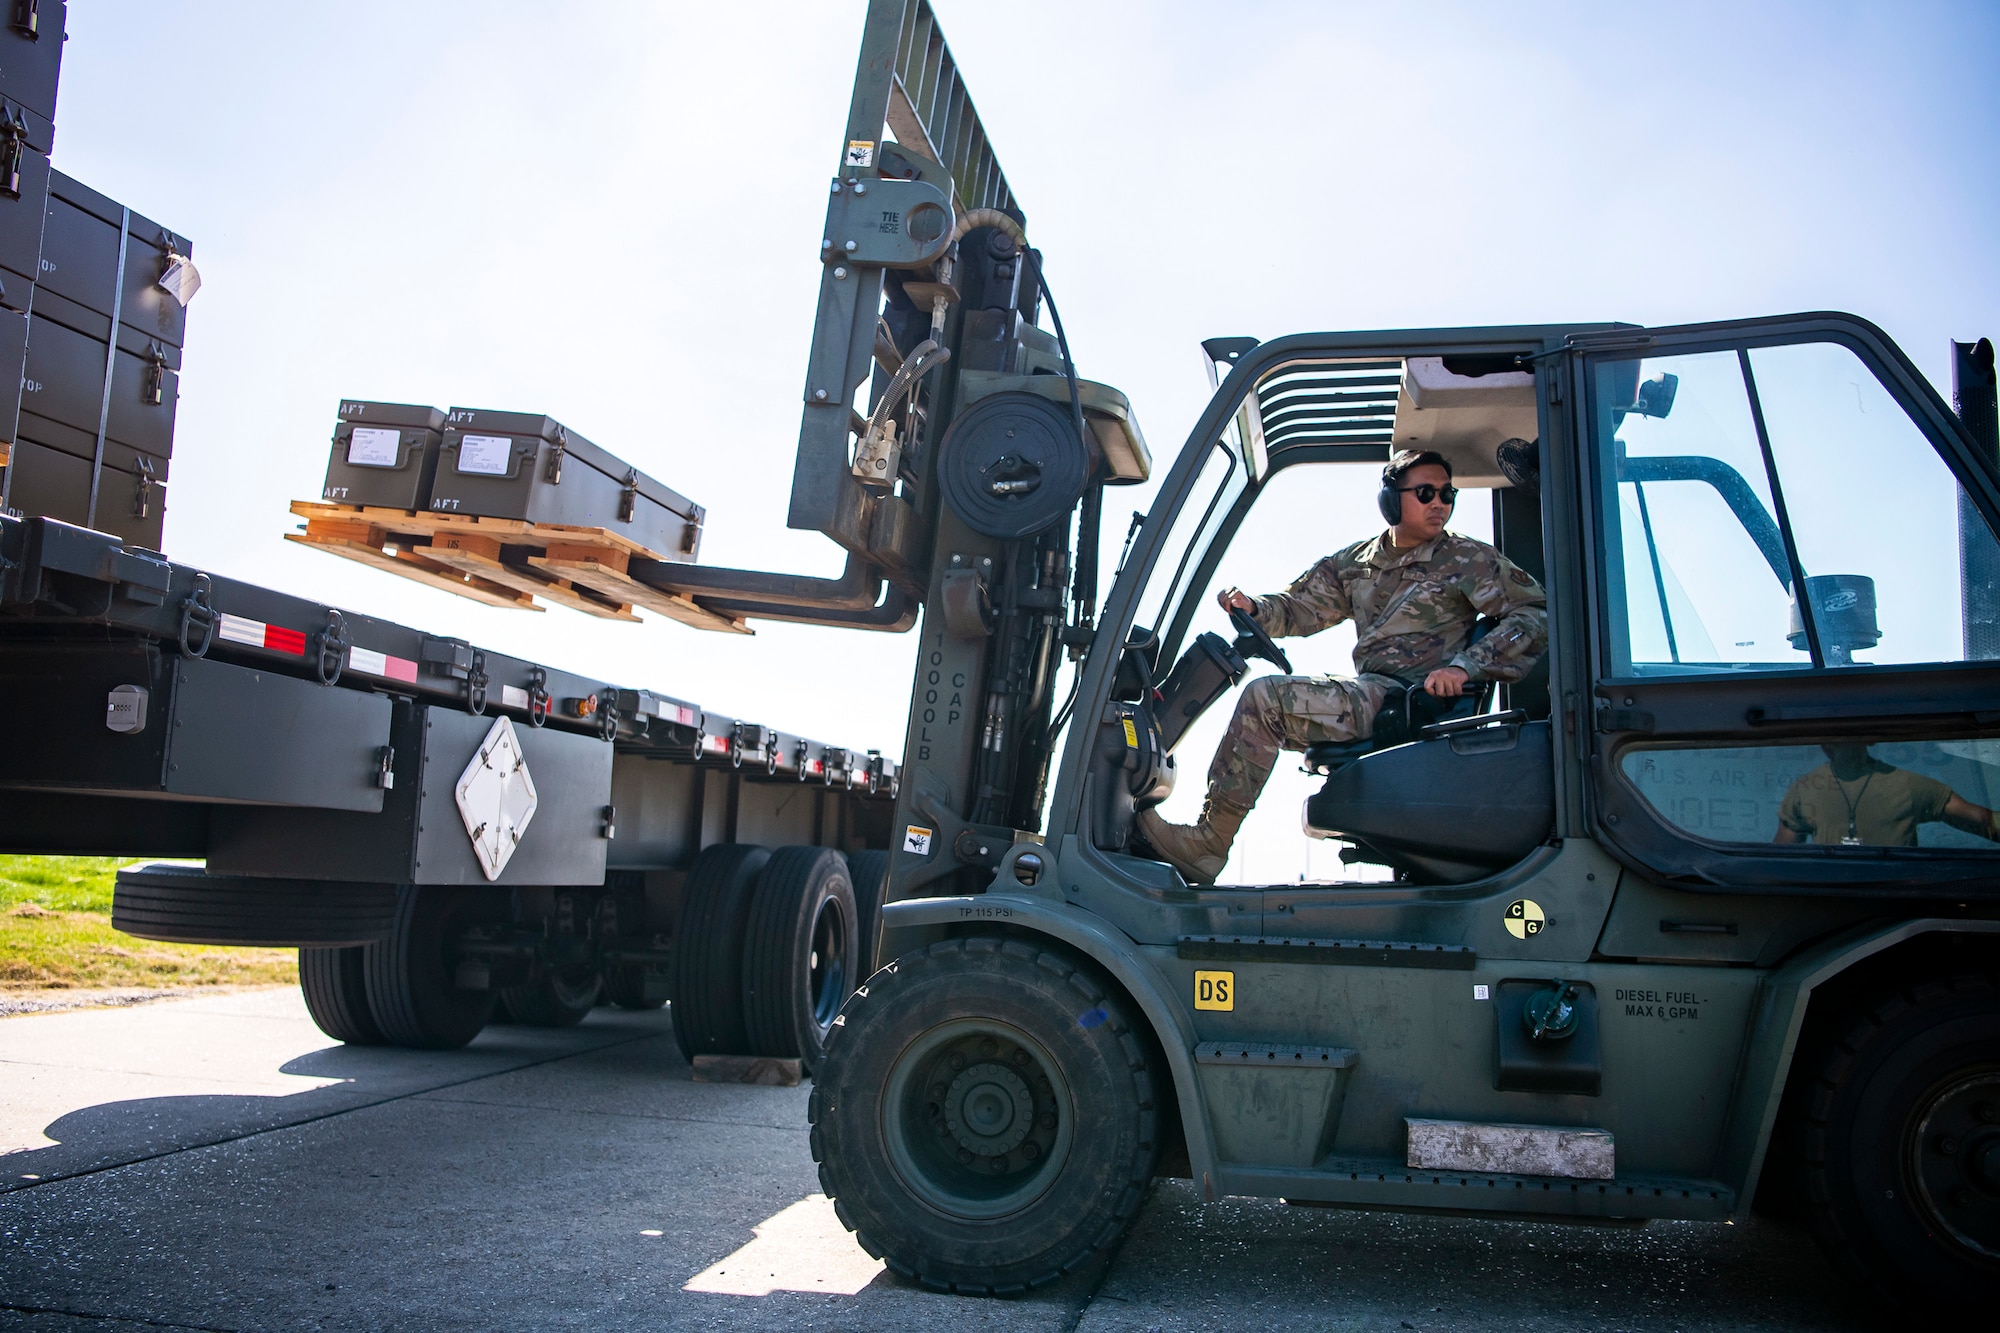 U.S. Air Force Senior Airman Von Mangaya, 420th Munitions Squadron stock pile technician, utilizes a forklift to move inert assets at RAF Welford, England, Sept. 7, 2021. Airmen from the 420th MUNS transported multiple inert assets to RAF Lakenheath for an upcoming Agile Combat Employment exercise. (U.S. Air Force photo by Senior Airman Eugene Oliver)